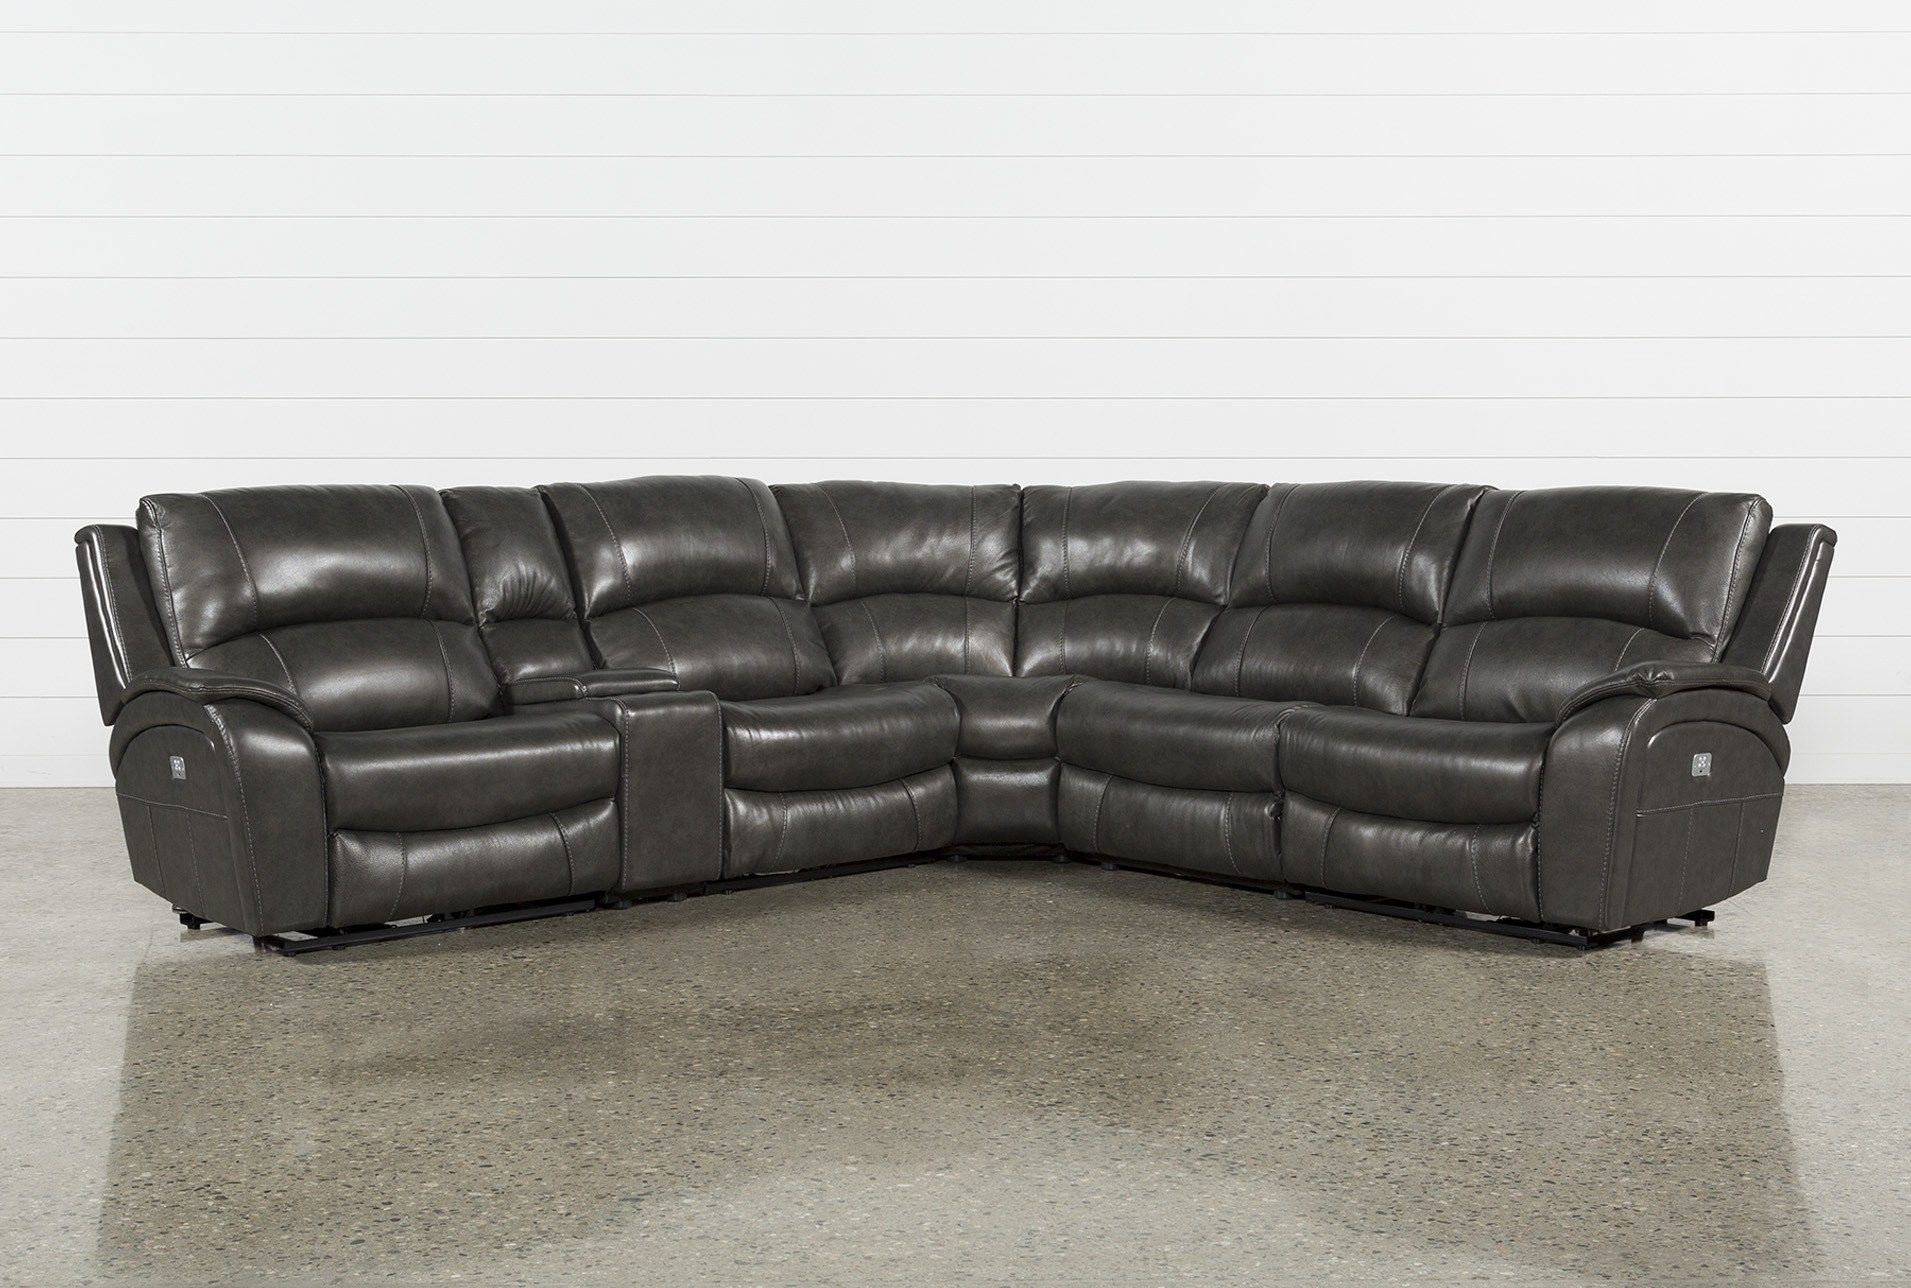 Grey Leather Sectional In Stylish Casual Classic Steel Piece Pertaining To Tenny Dark Grey 2 Piece Right Facing Chaise Sectionals With 2 Headrest (View 7 of 30)